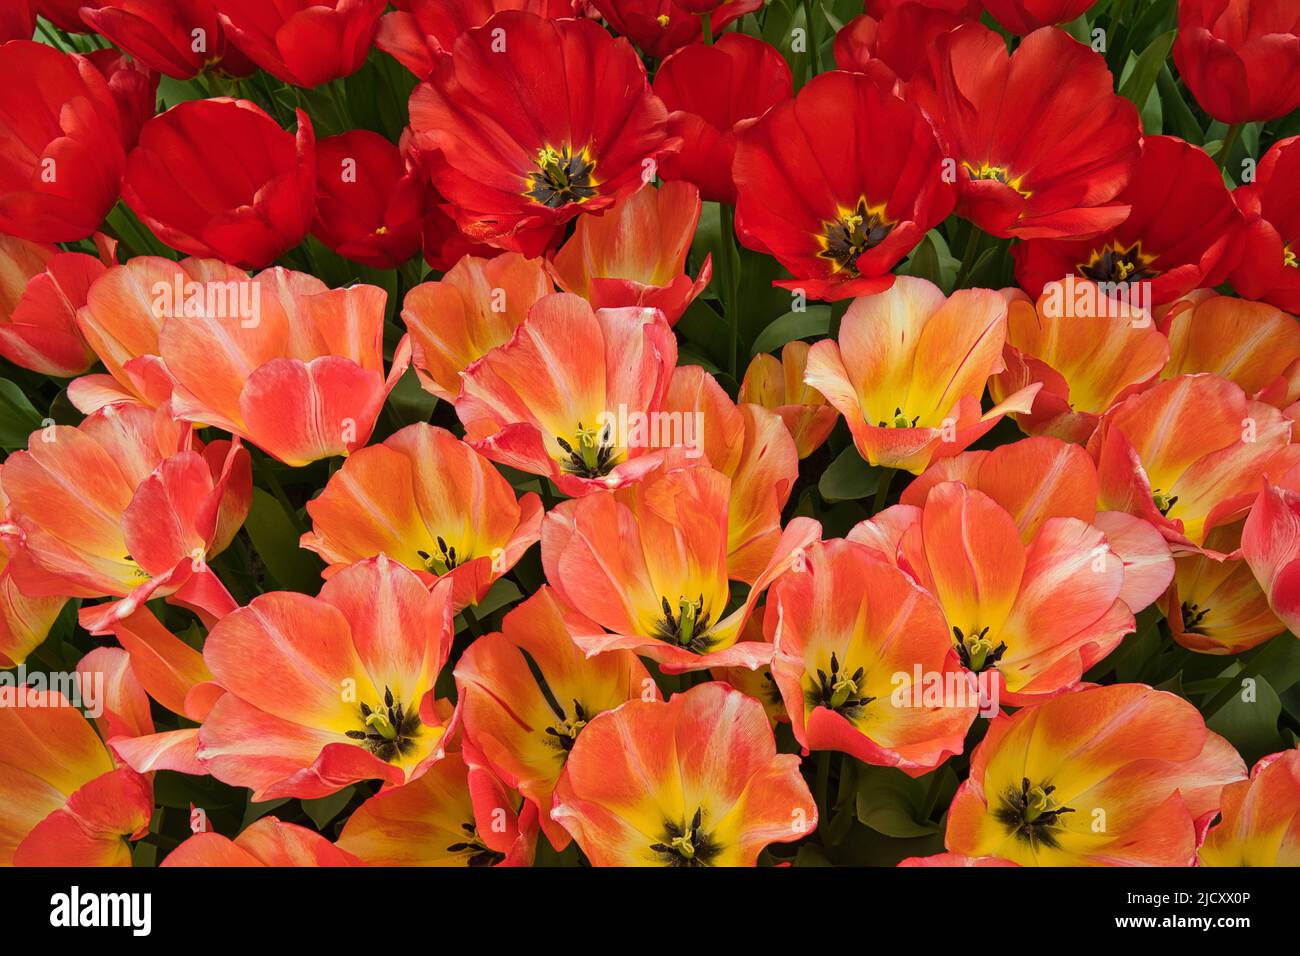 Birds eye view of red and orange flowers in flower bed Stock Photo